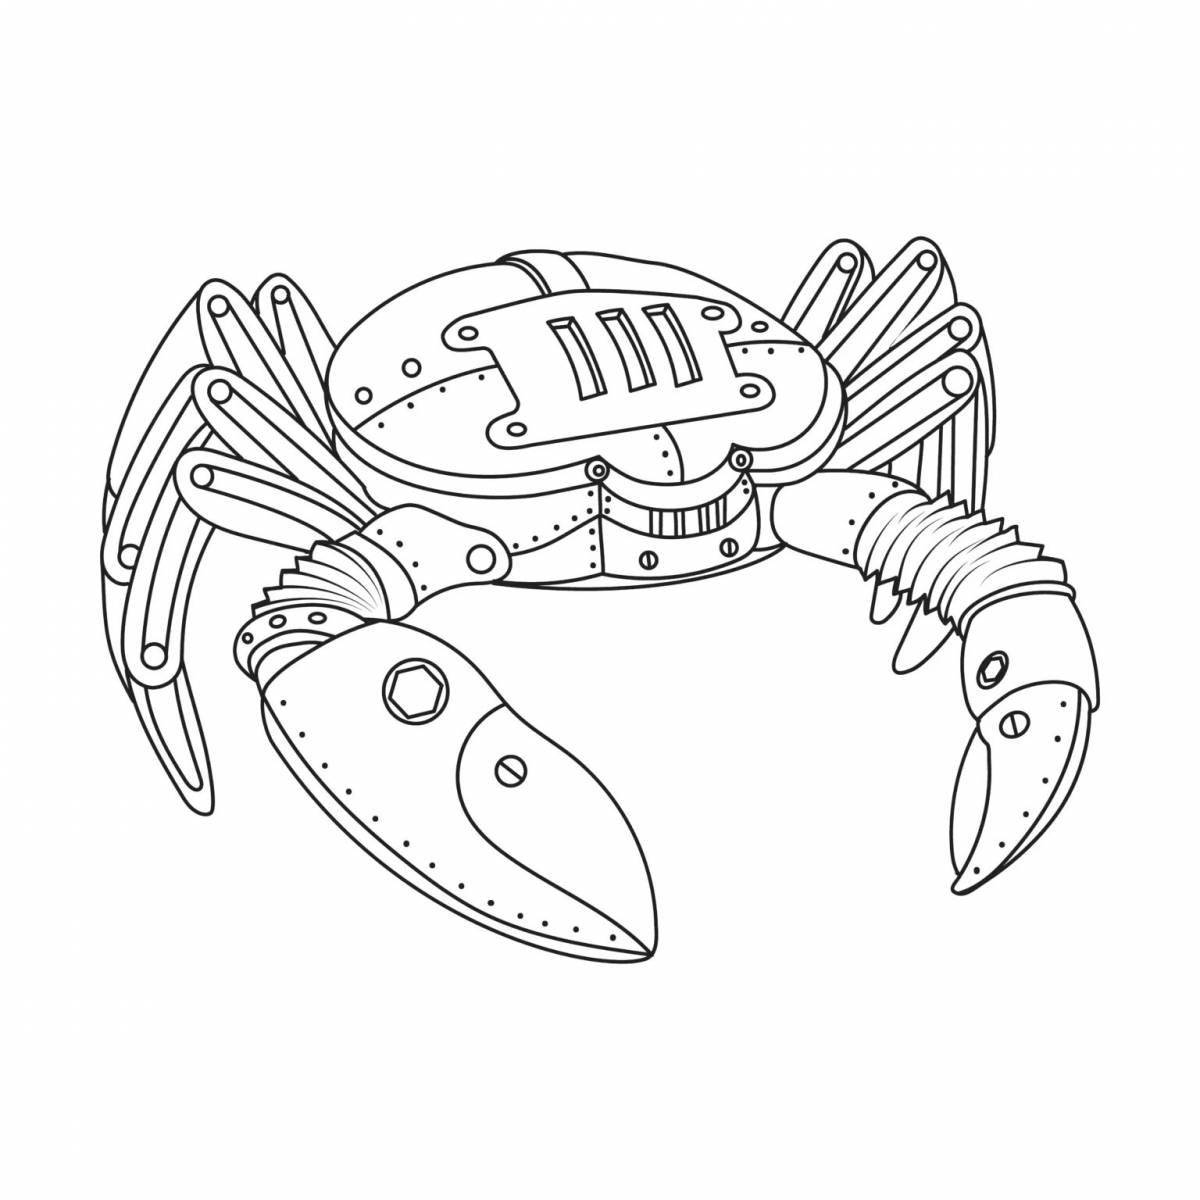 Intricate spider robot coloring page